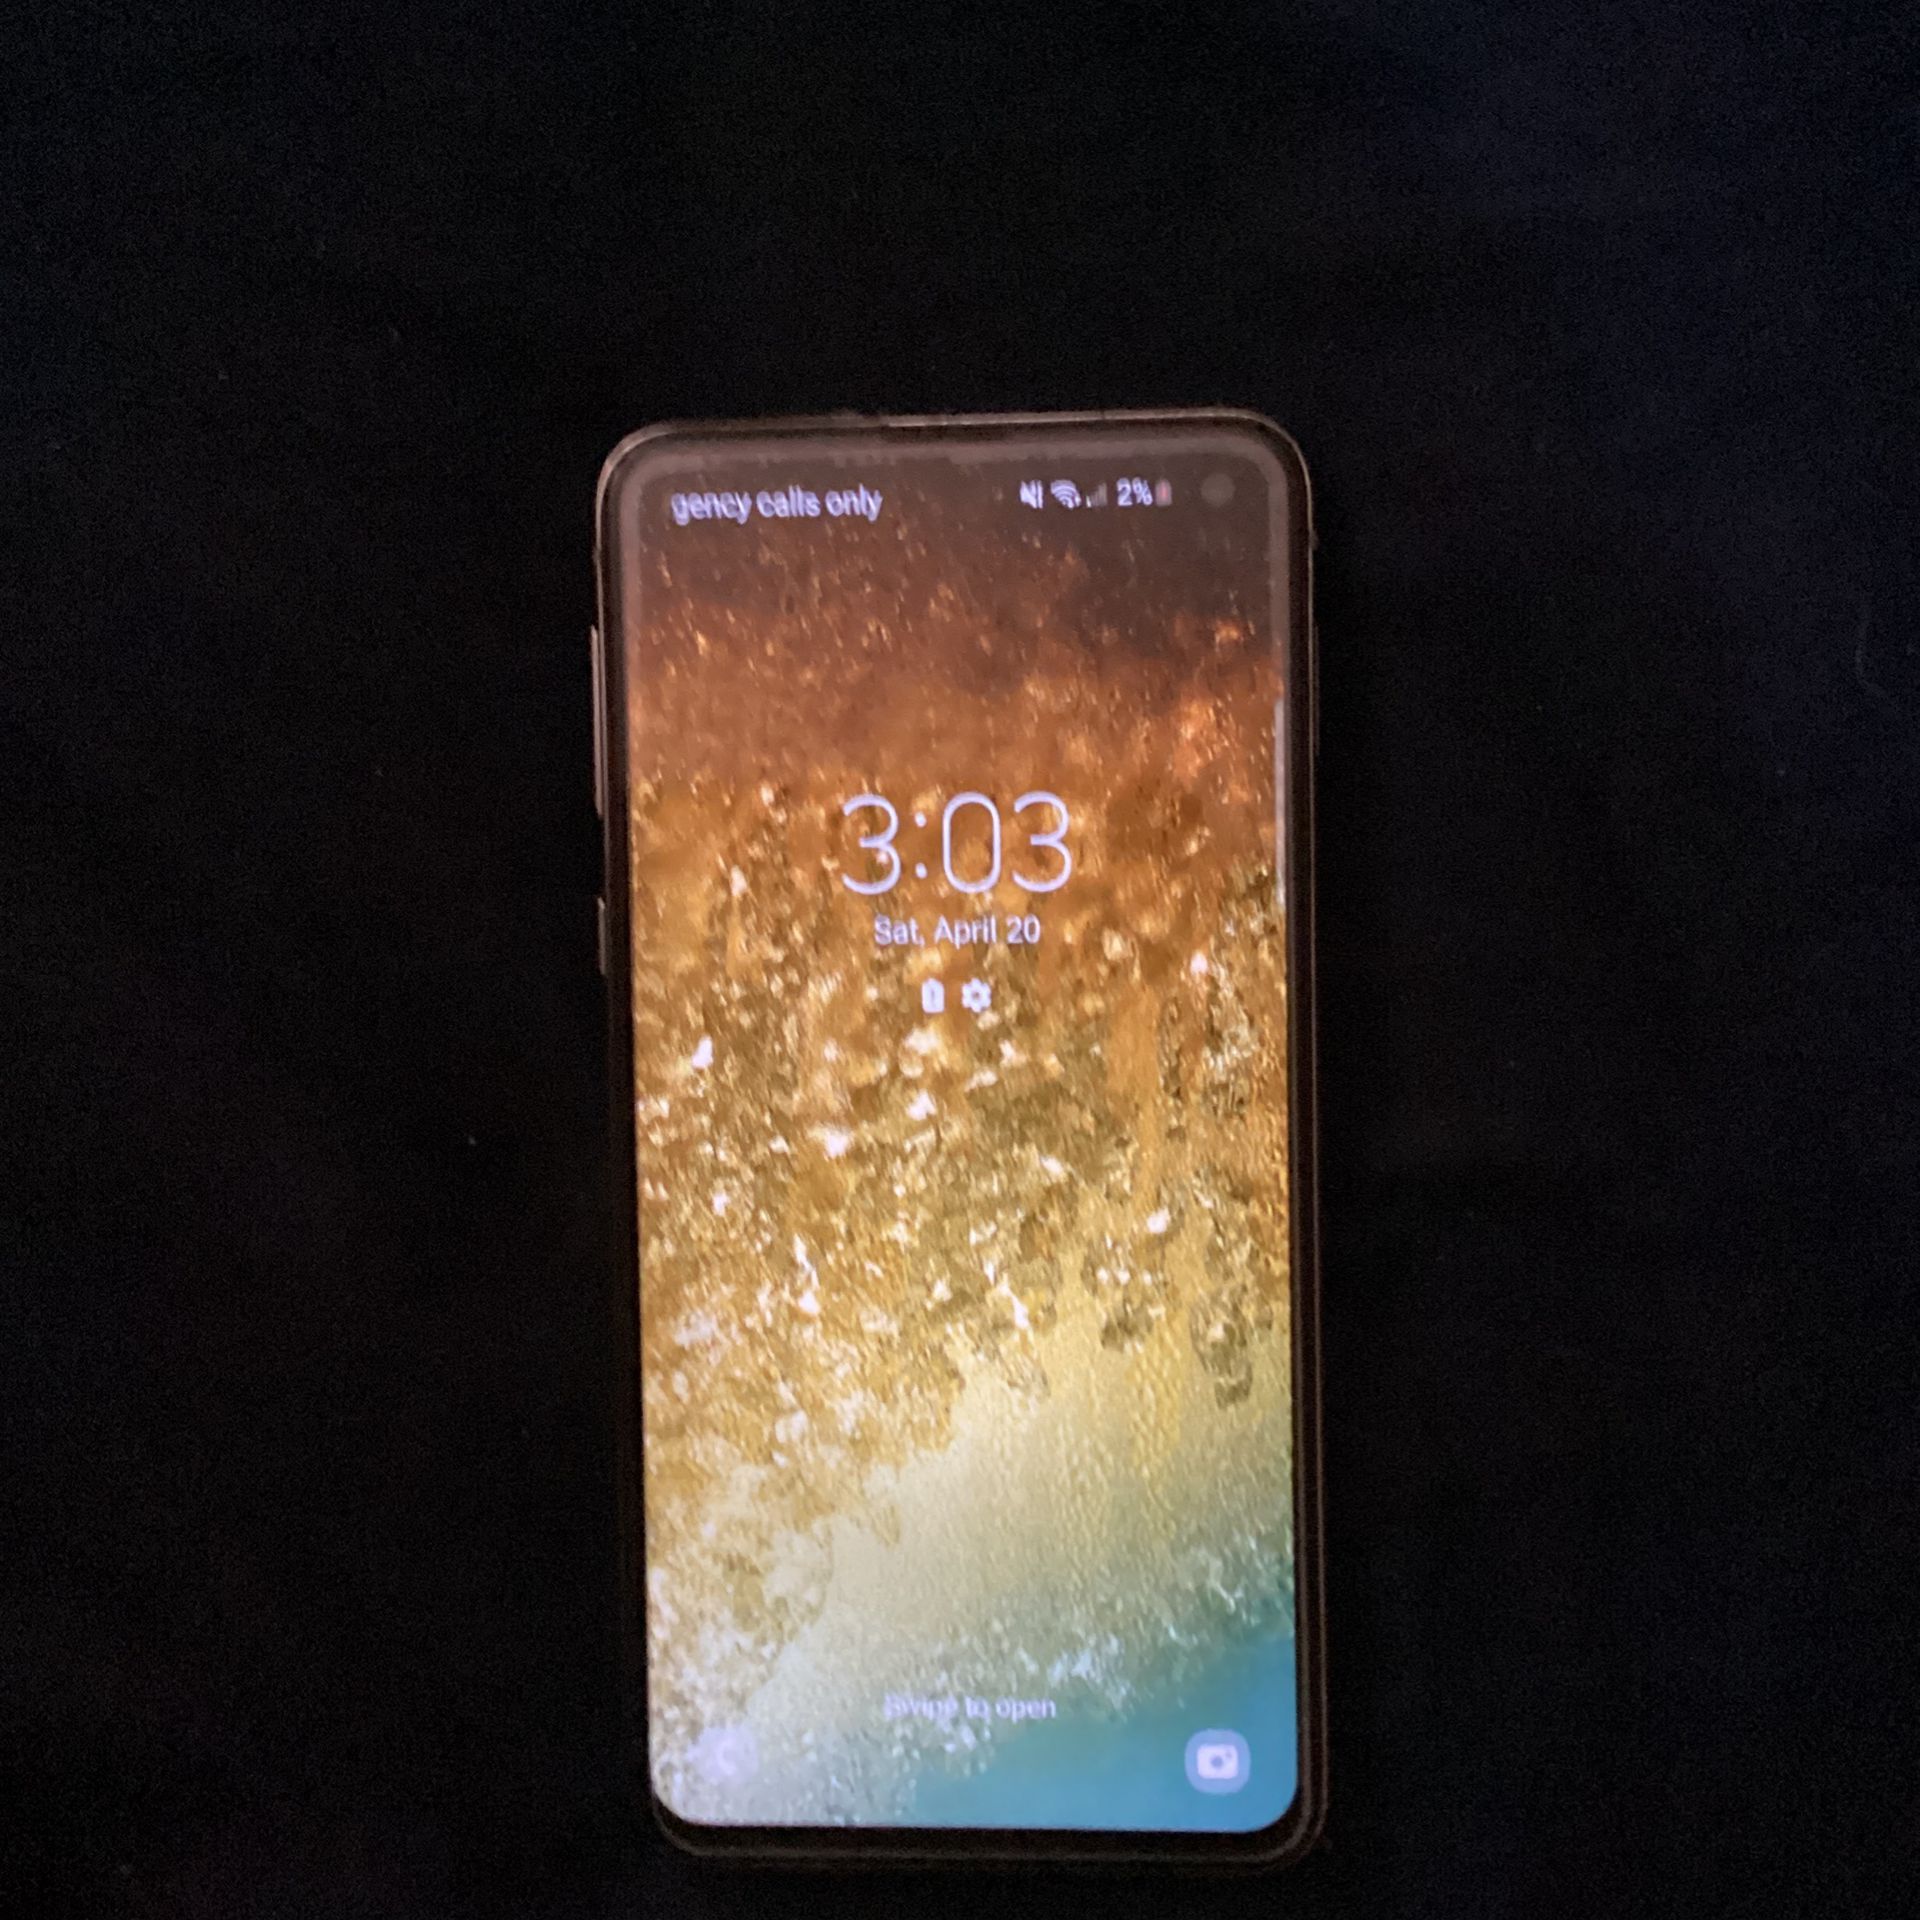 Unlocked Galaxy S10e Works Perfect Comes With Case